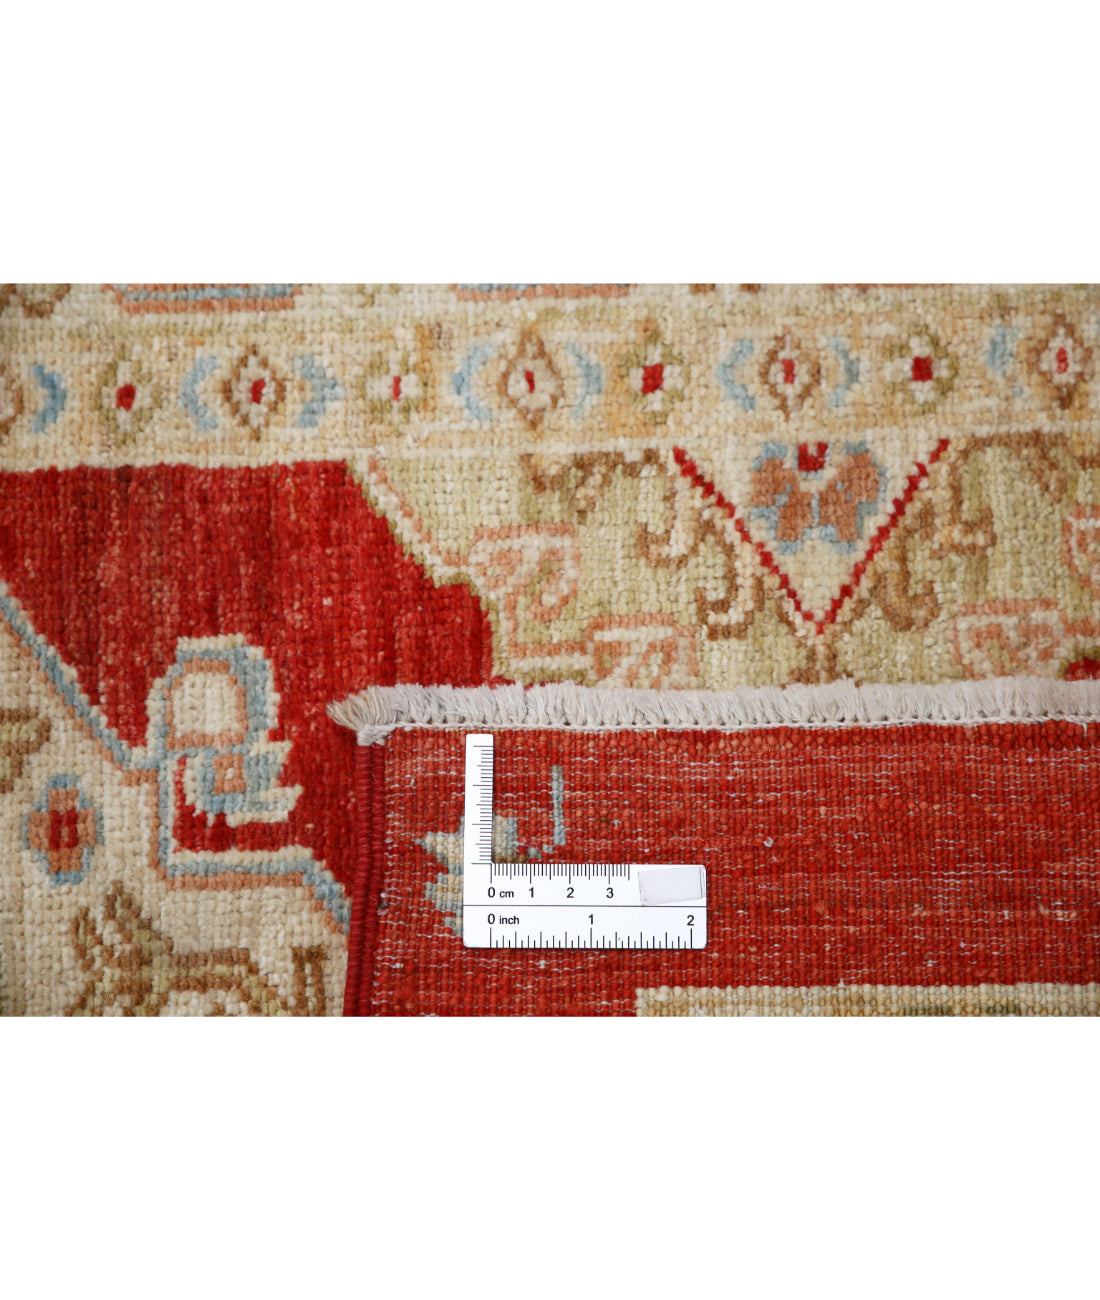 Ziegler 2'8'' X 7'4'' Hand-Knotted Wool Rug 2'8'' x 7'4'' (80 X 220) / Red / Red